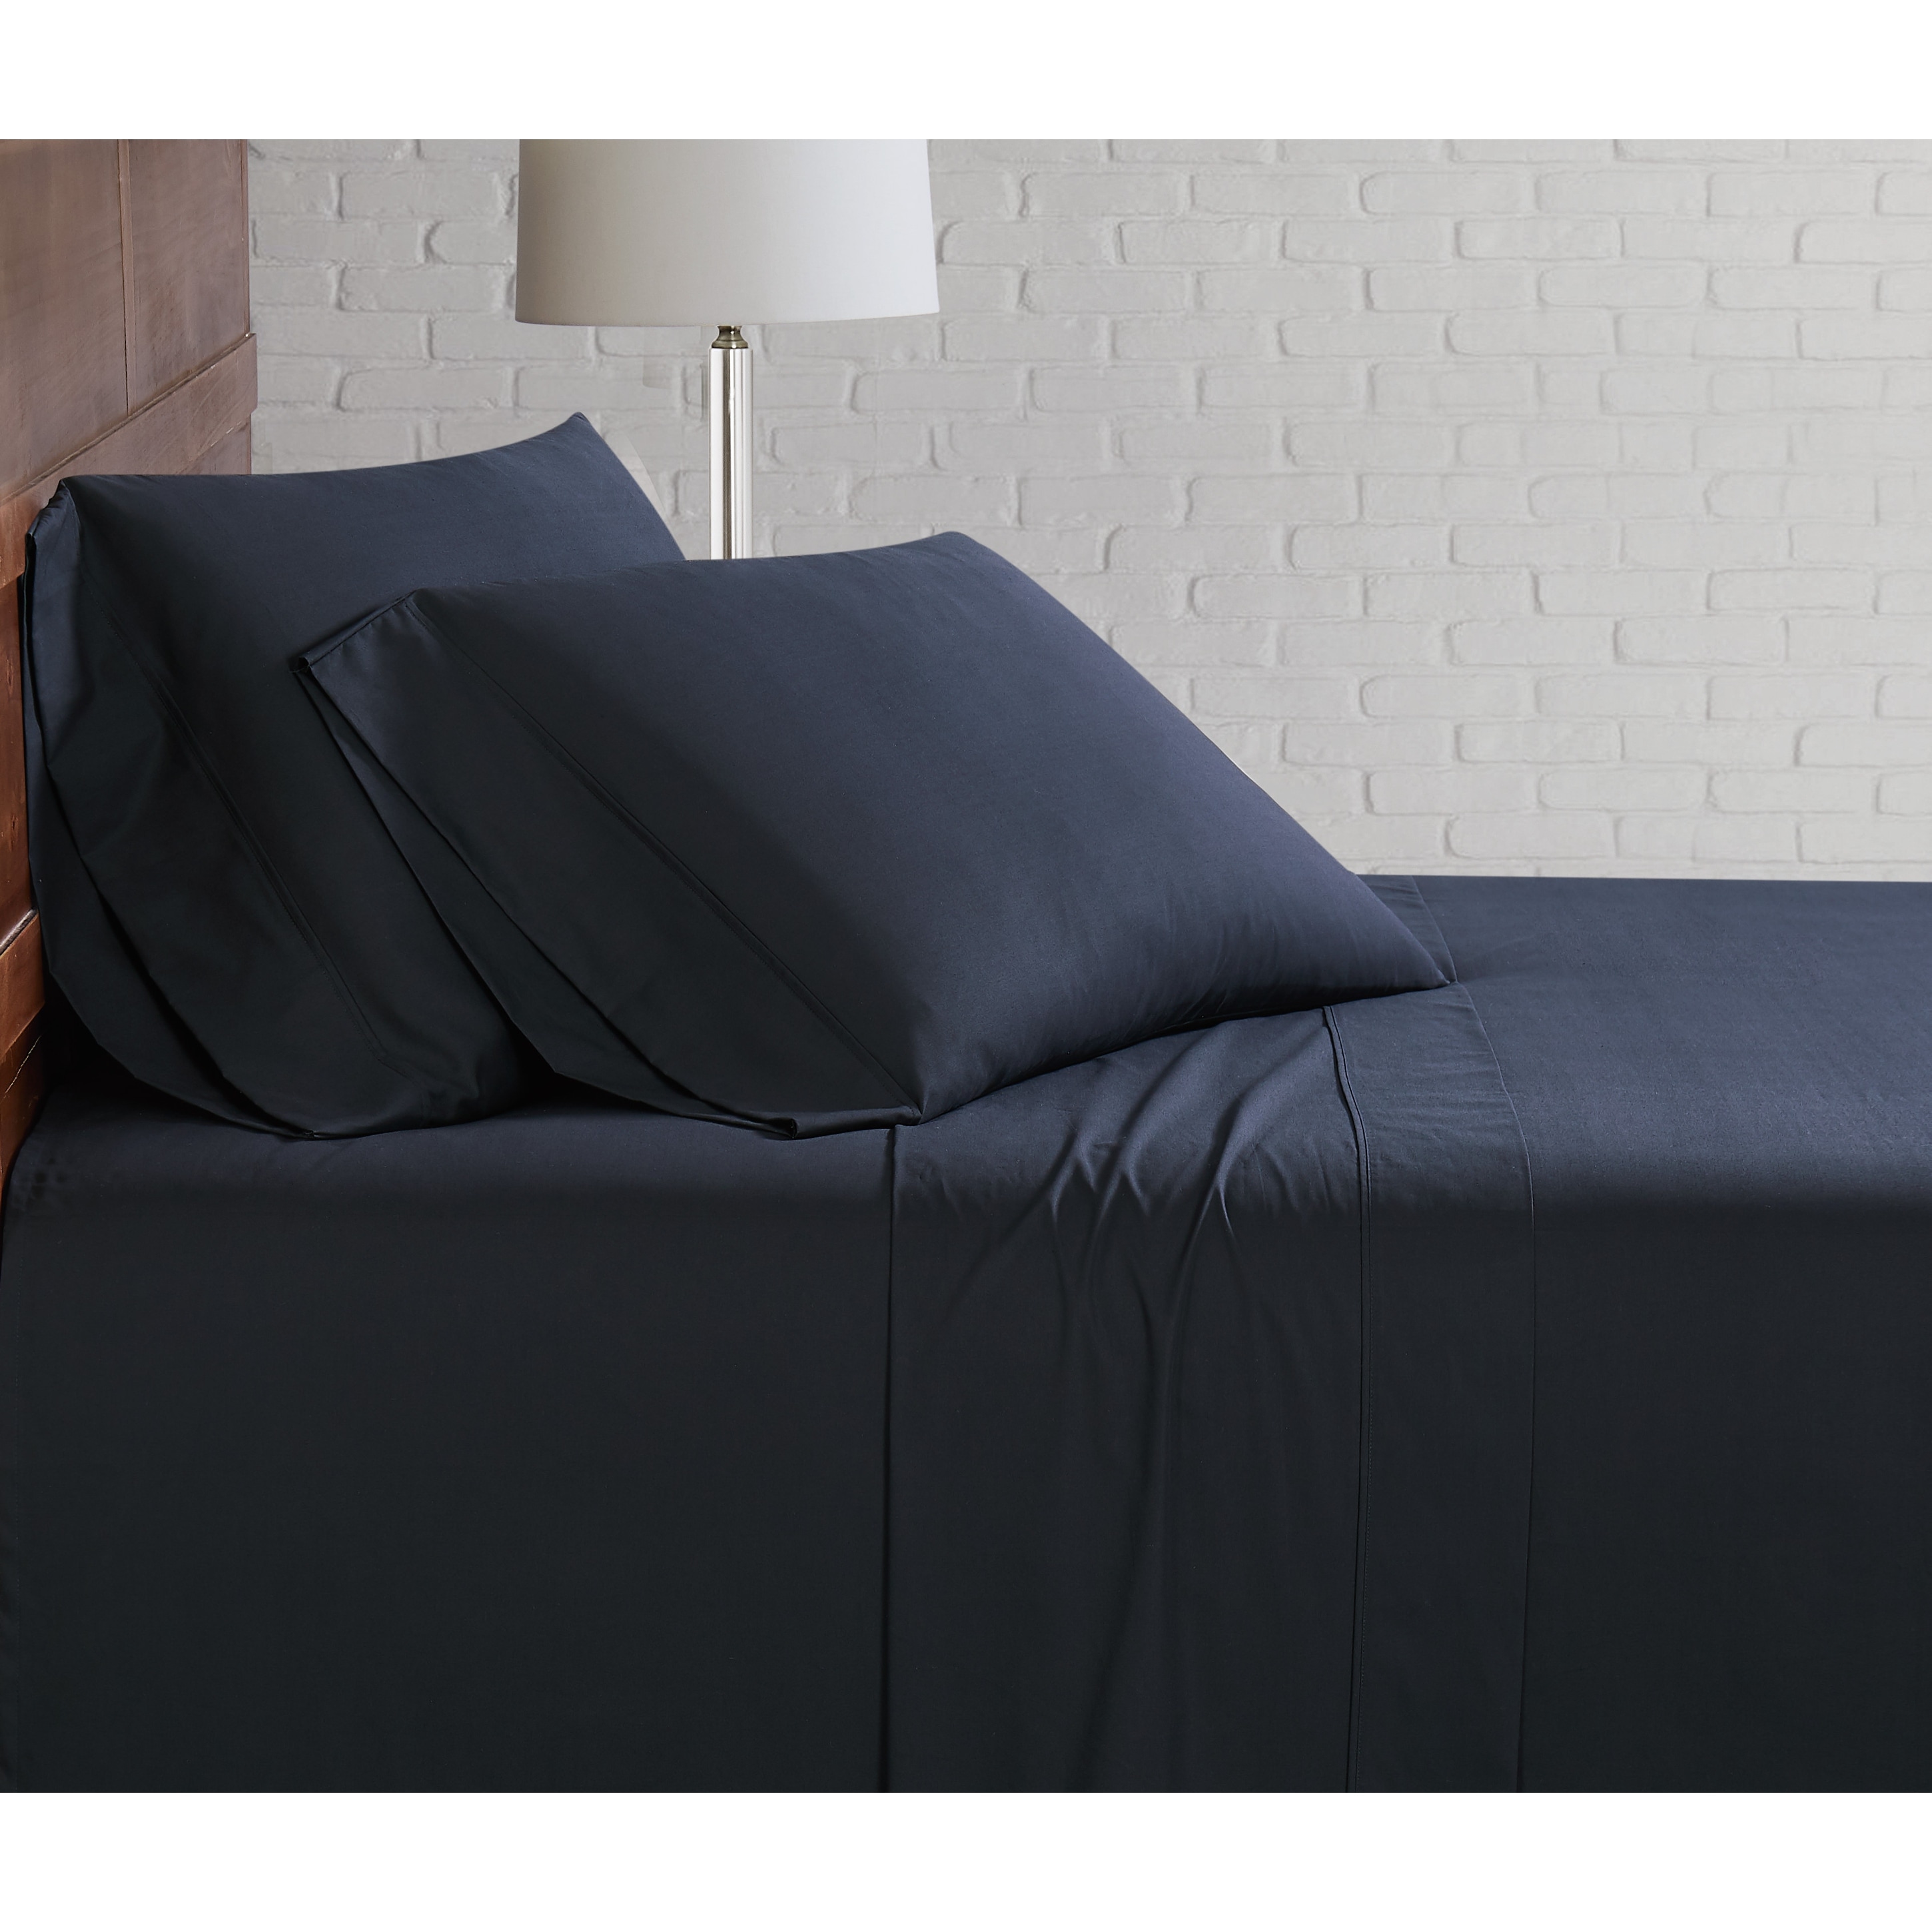 Percale Bed Sheets and Pillowcases - Bed Bath & Beyond